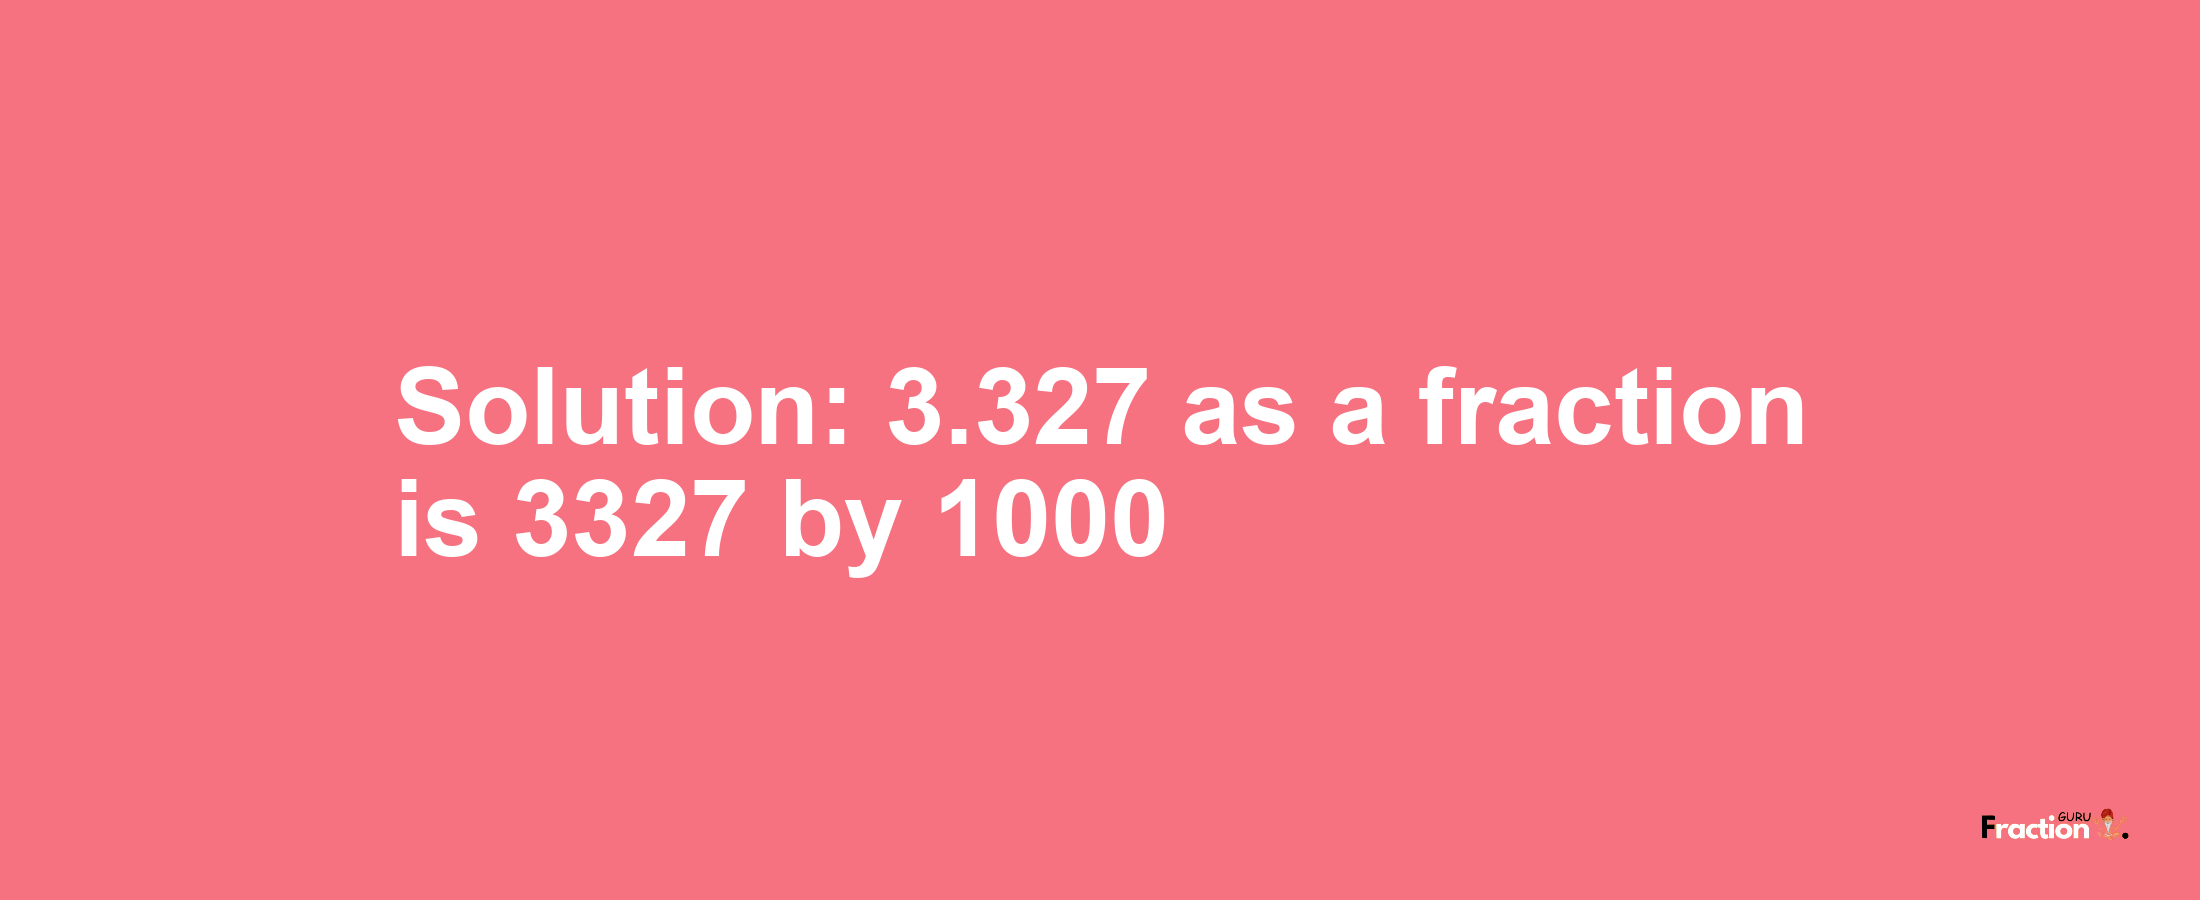 Solution:3.327 as a fraction is 3327/1000